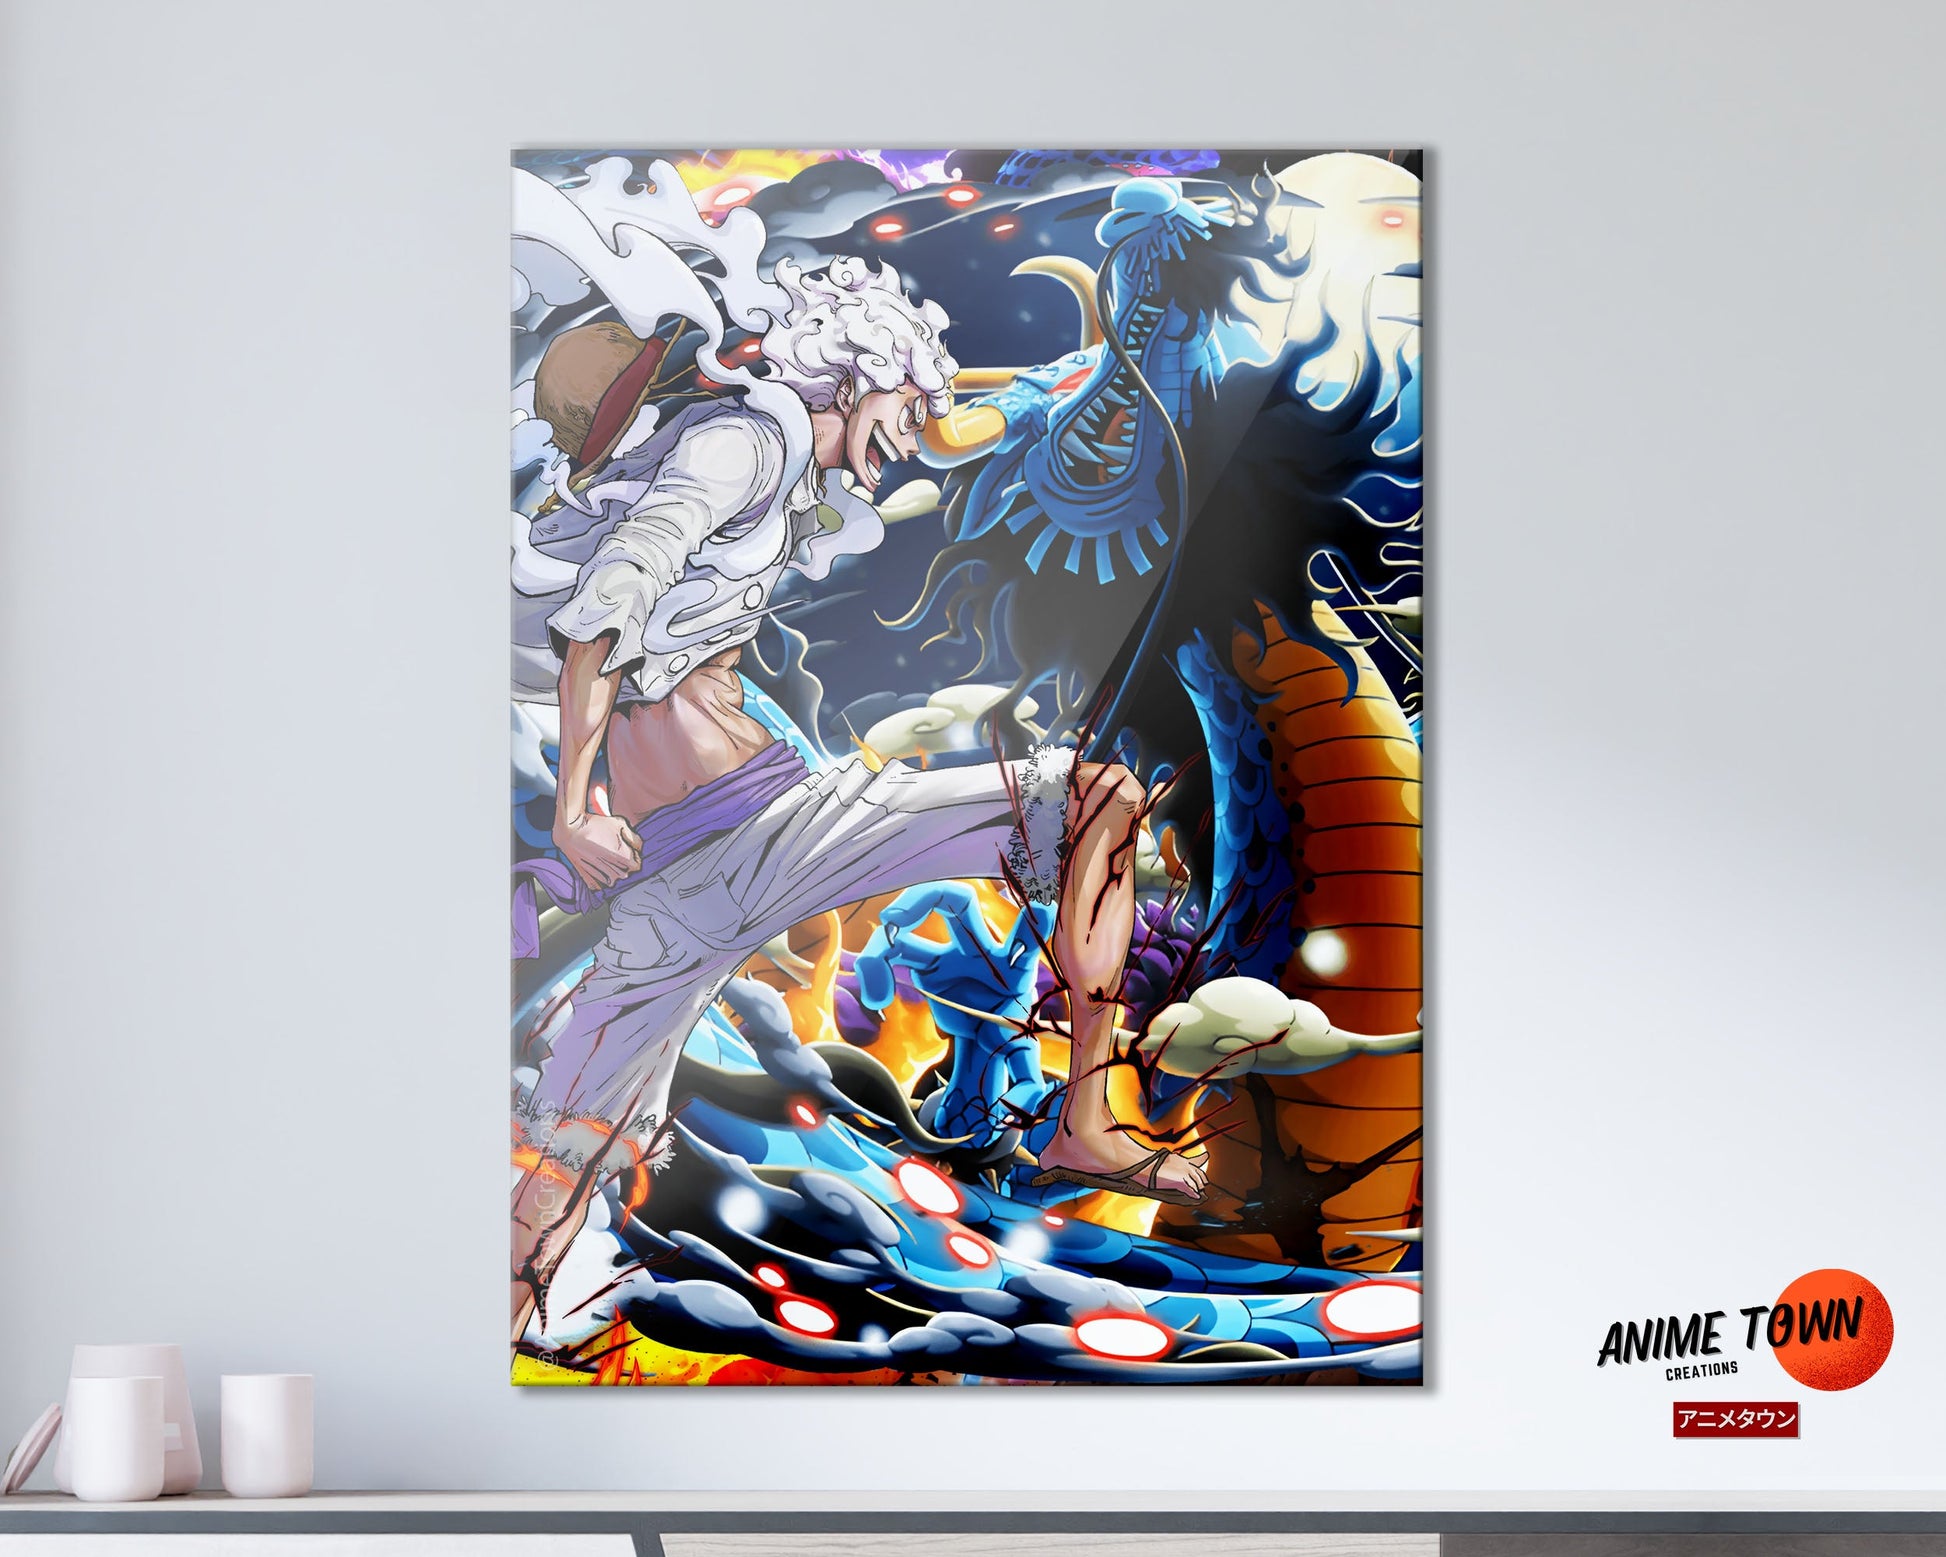 Anime Town Creations Metal Poster One Piece Luffy Gear 5 vs Kaido 11" x 17" Home Goods - Anime One Piece Metal Poster